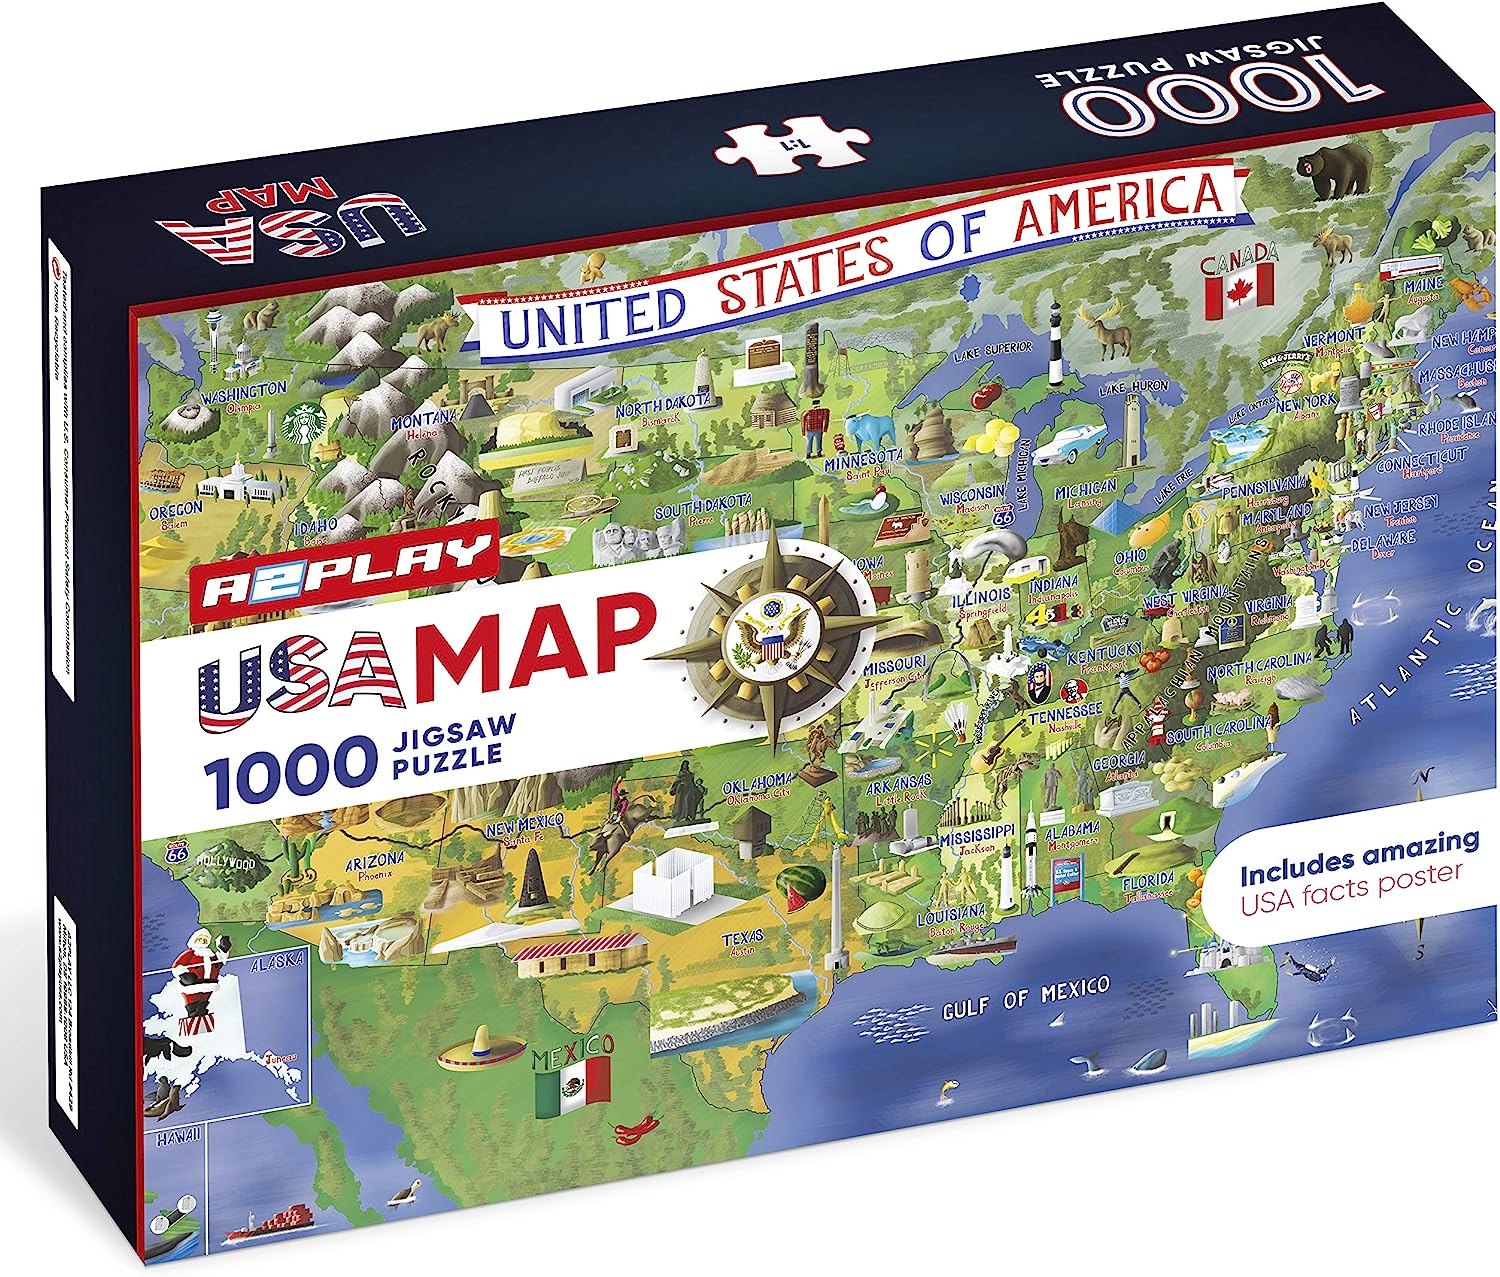 USA Map Puzzle 1000 Piece for Adults, United States of America, Patriotic Jigsaw Puzzle & Bonus Fact Poster by , Premium Materials, 27.5 x 19.7 in